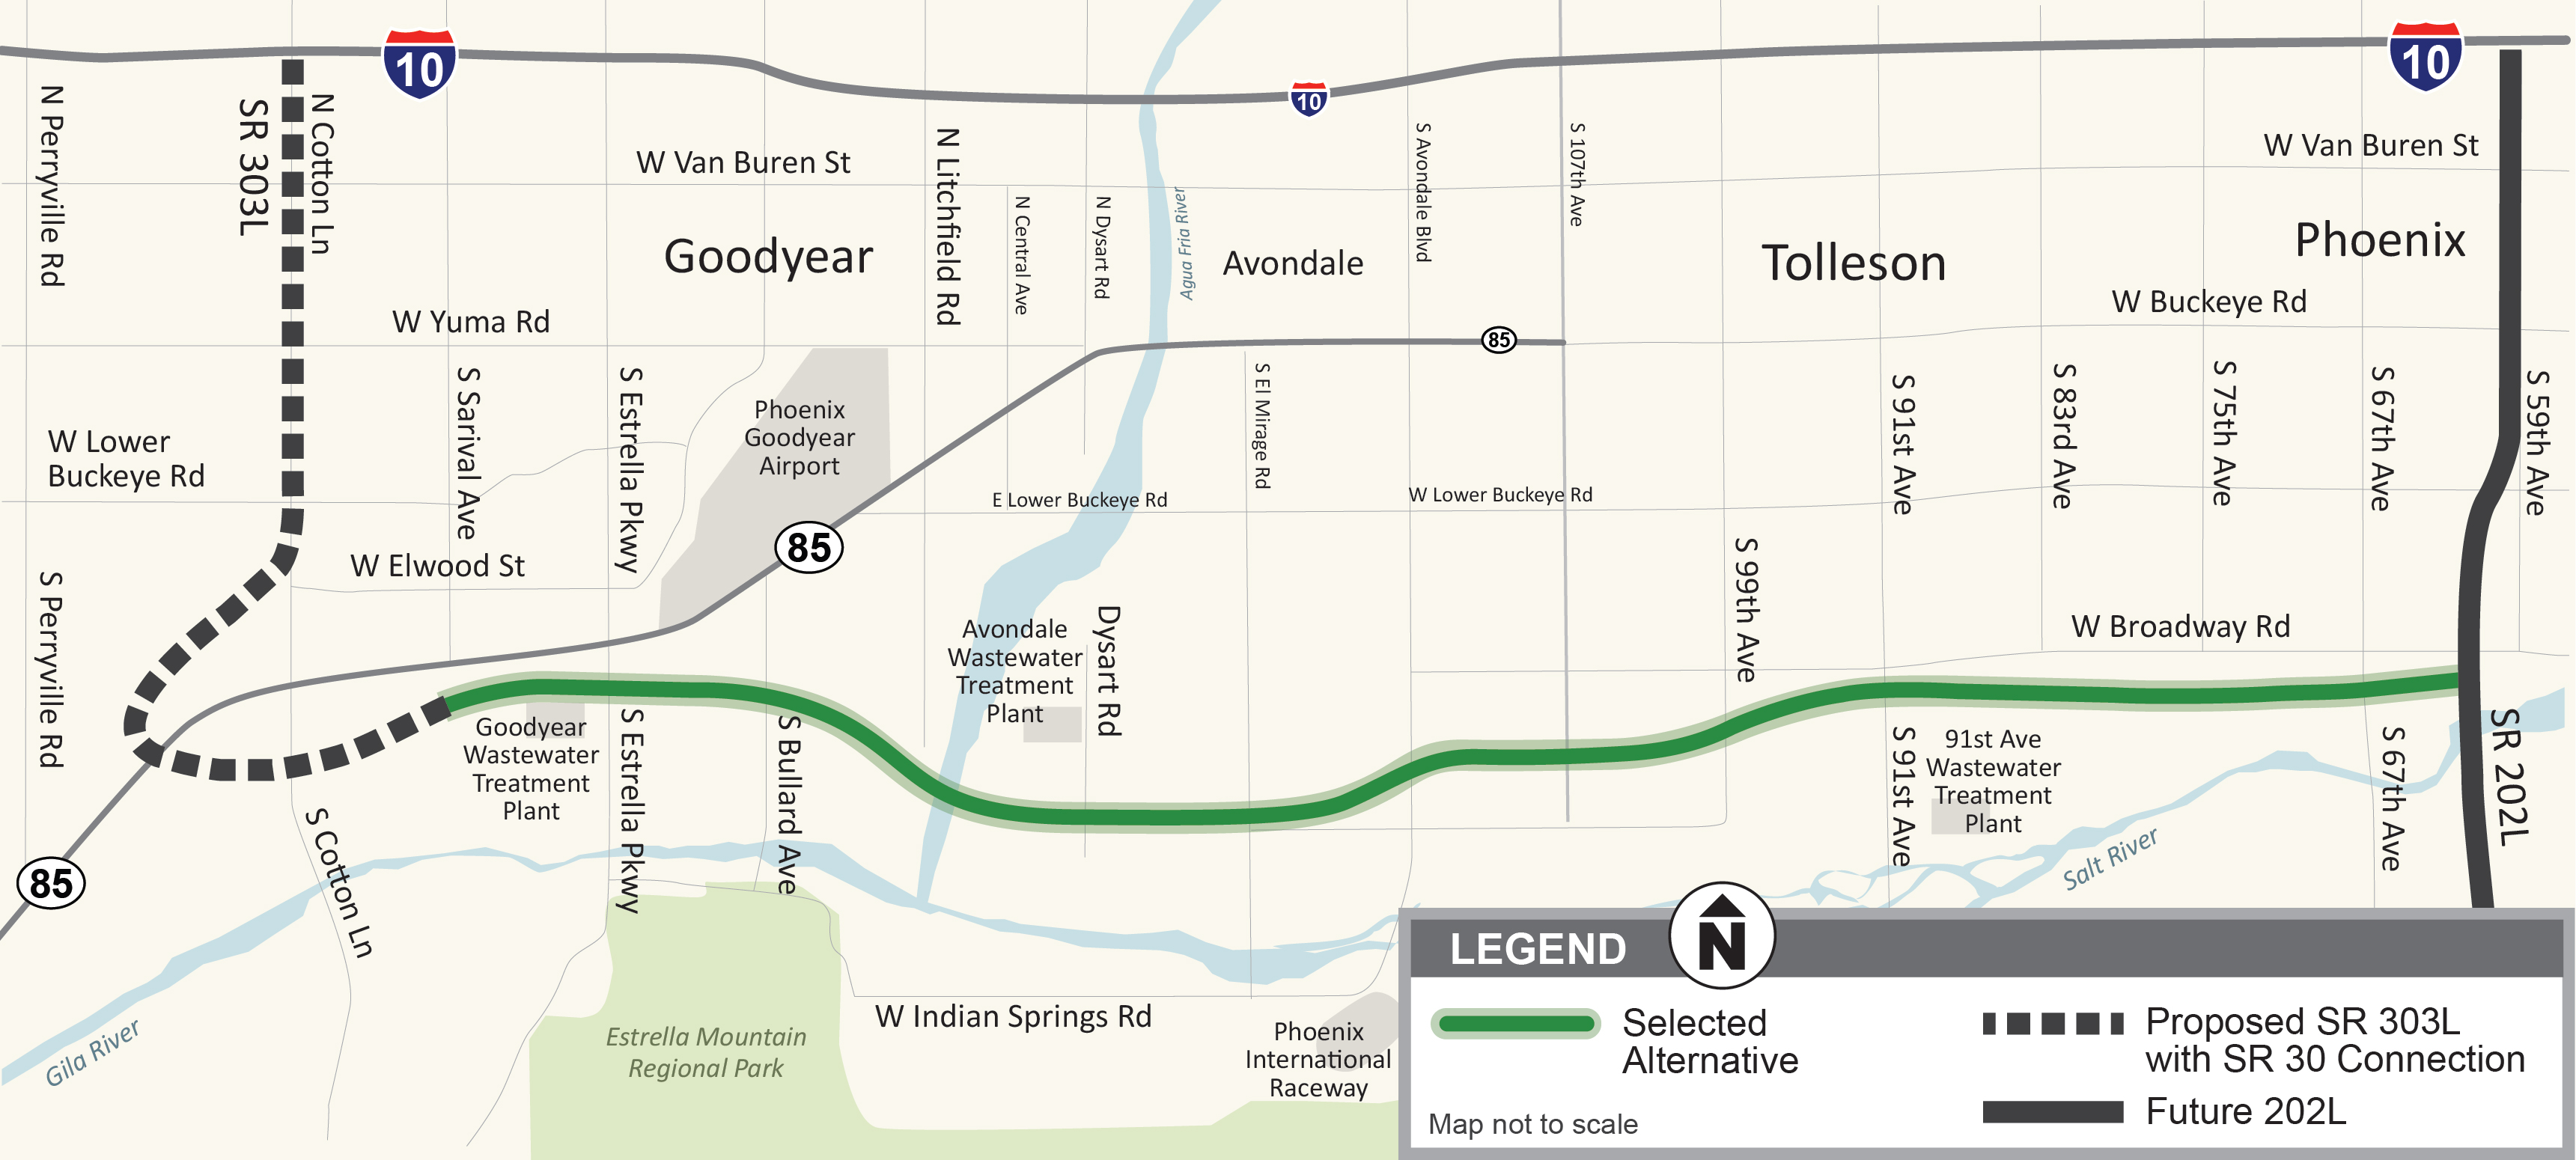 State Route 30 Study Recommended Alternatives